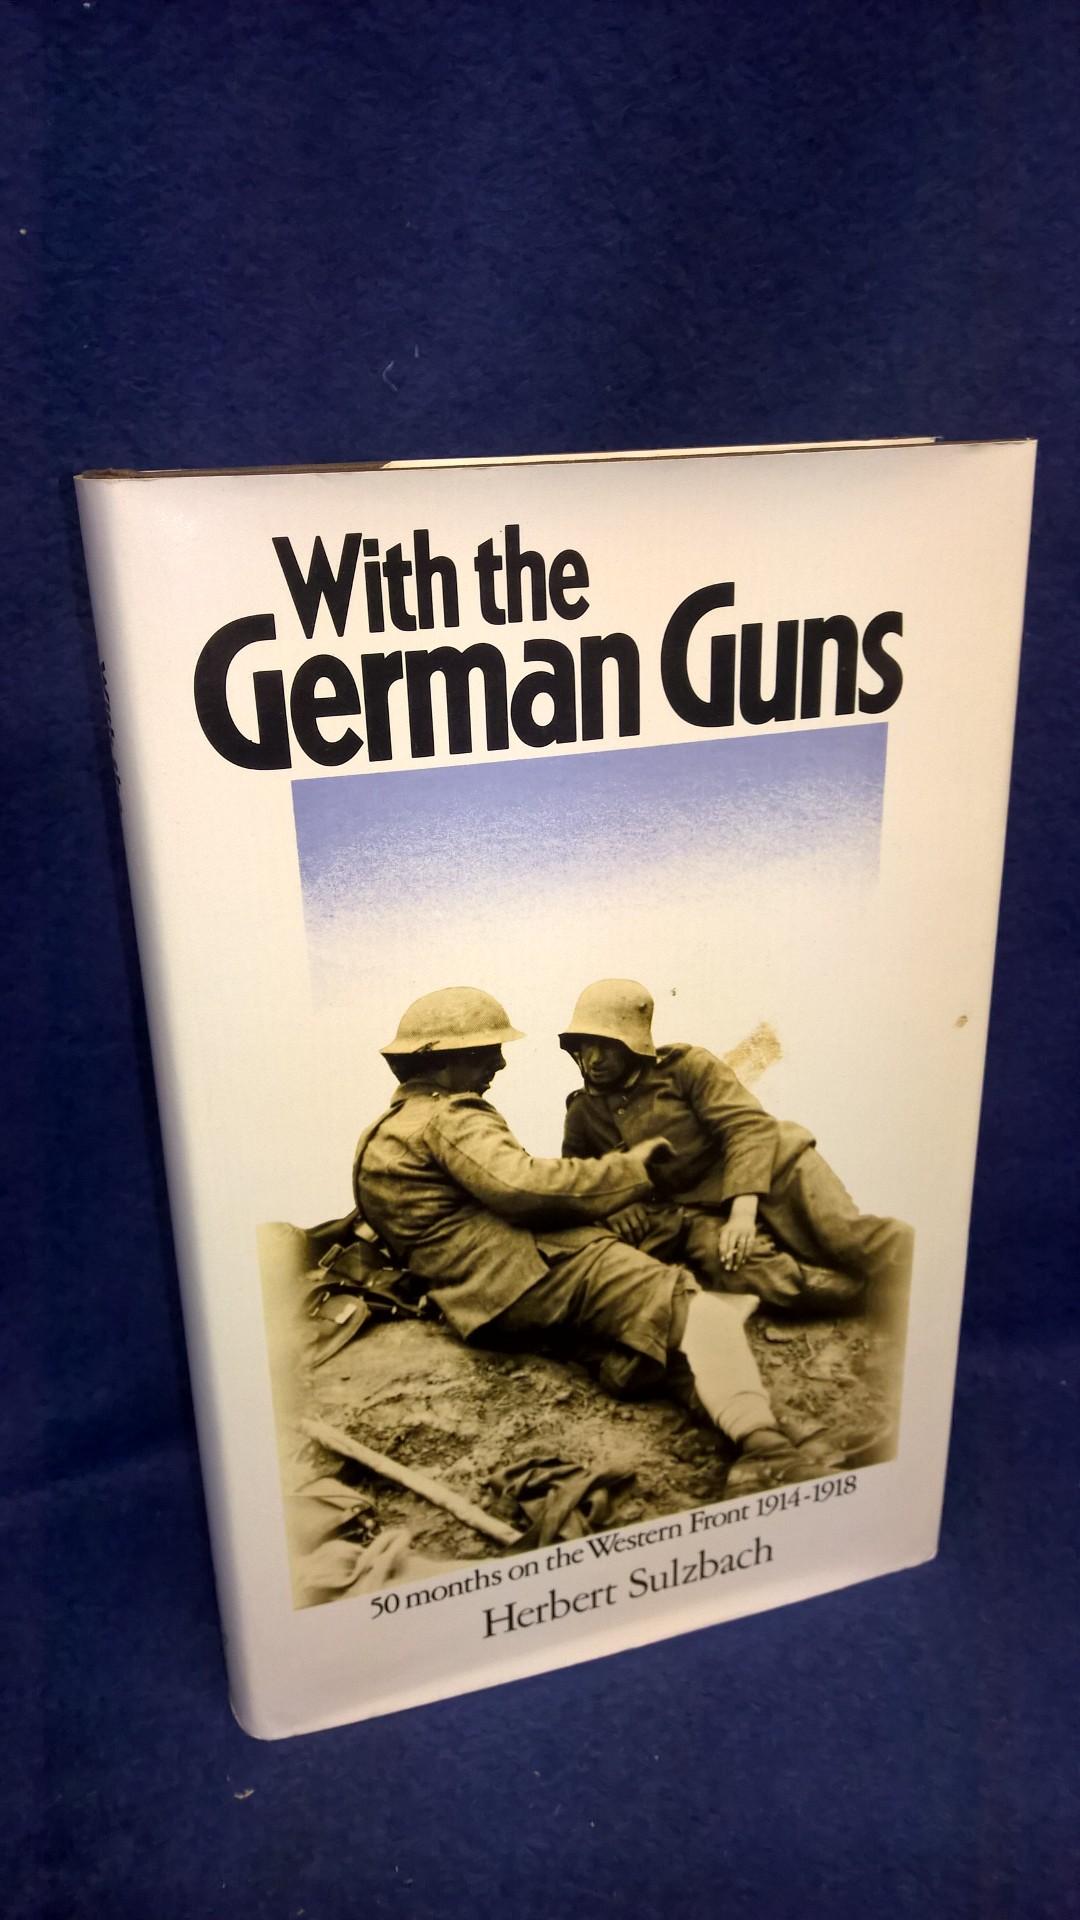 With the German Guns: Four Years on the Western Front 1914-1918.